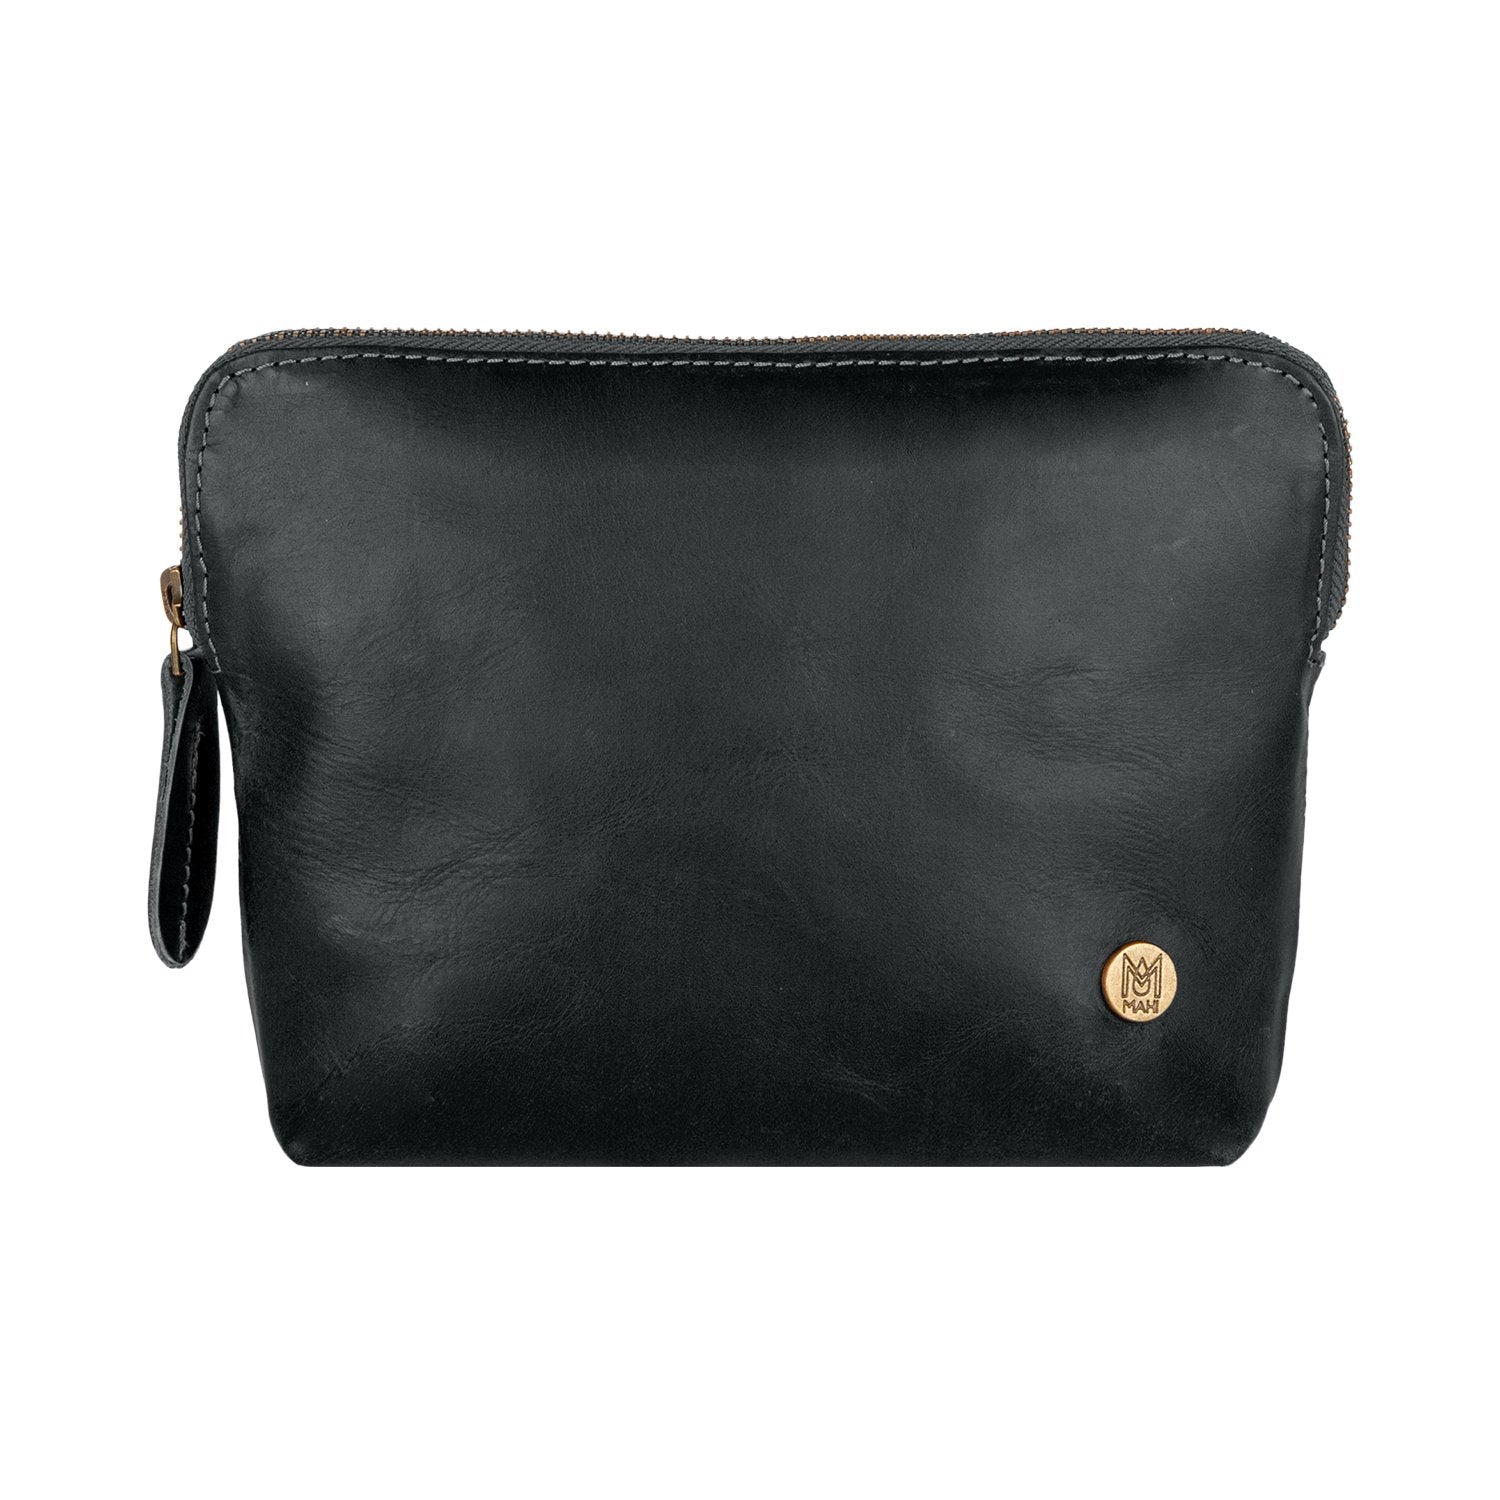 Black Leather Make-Up Toiletry Bag | Personalized Small Cosmetics Bag –  MAHI Leather